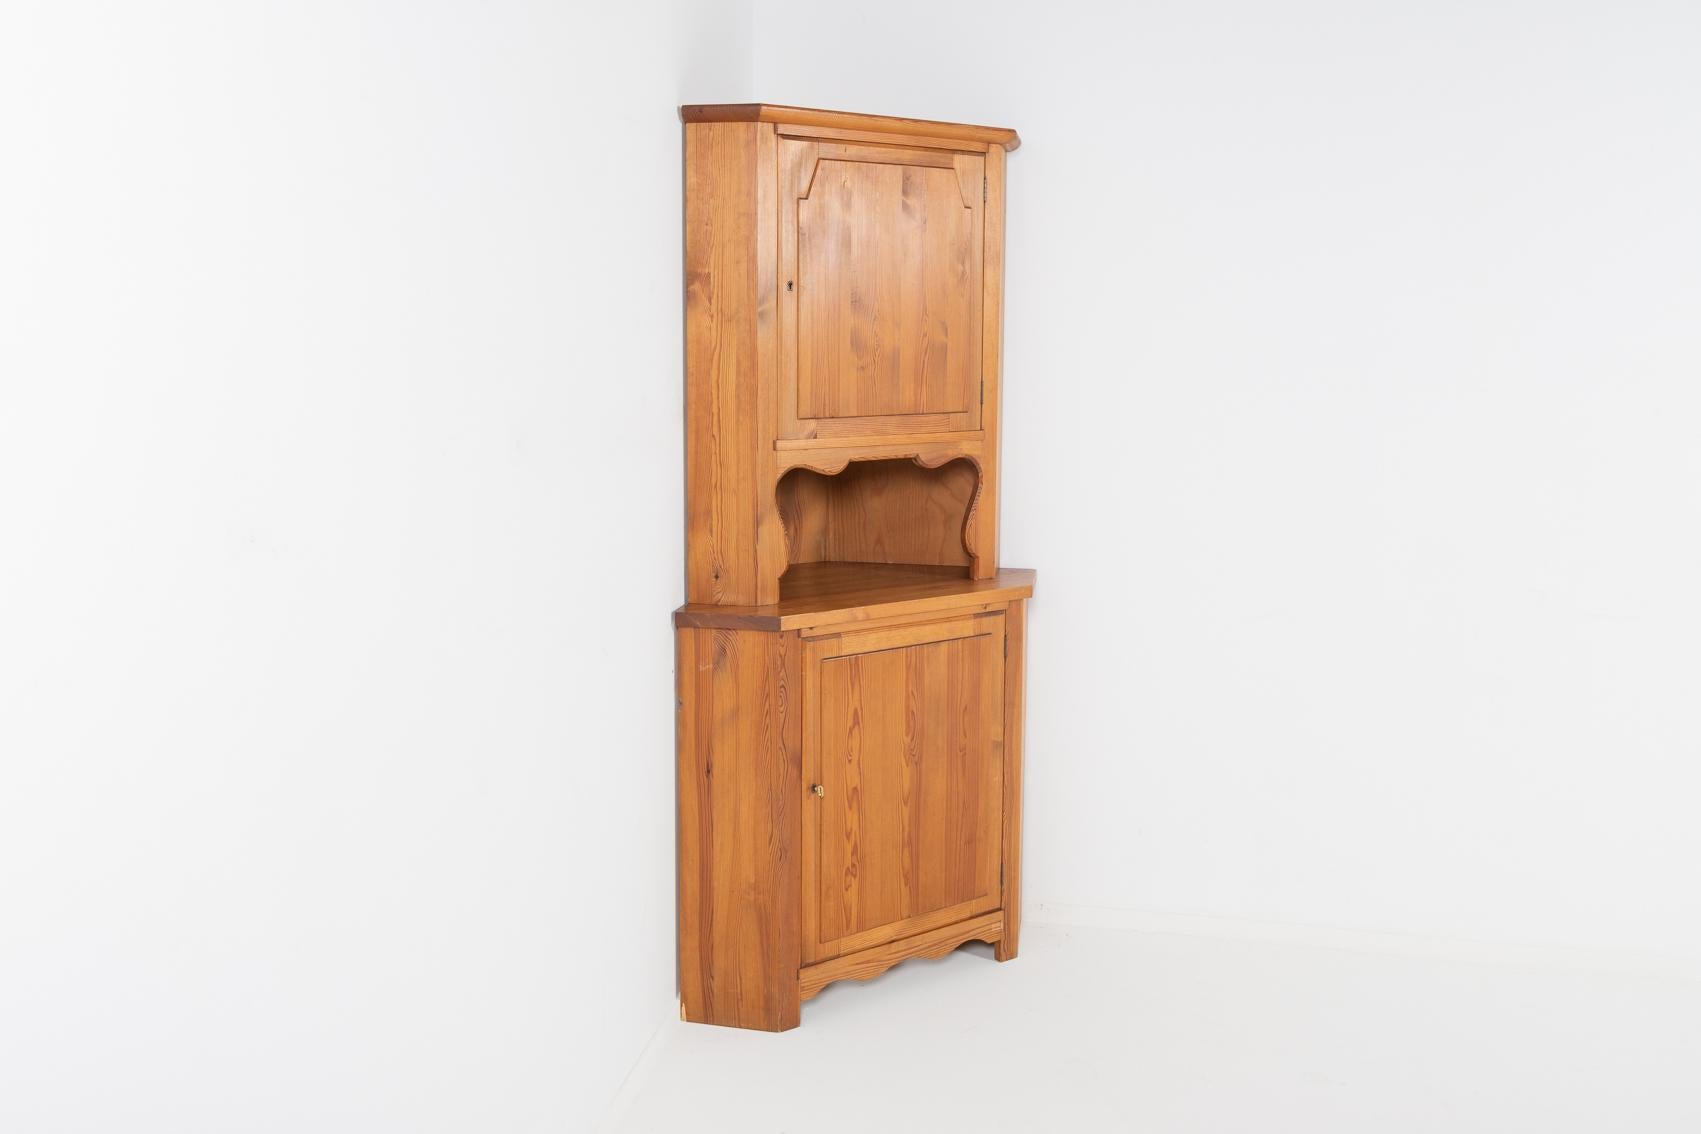 Scandinavian Modern solid pine corner cabinet by Swedish icon Axel Einar Hjorth for Nordiska Kompaniet from the acclaimed so called “Sportstugemöbel” series, produced in 1940s. Made from solid acid treated pine wood. Two cabinets with individual